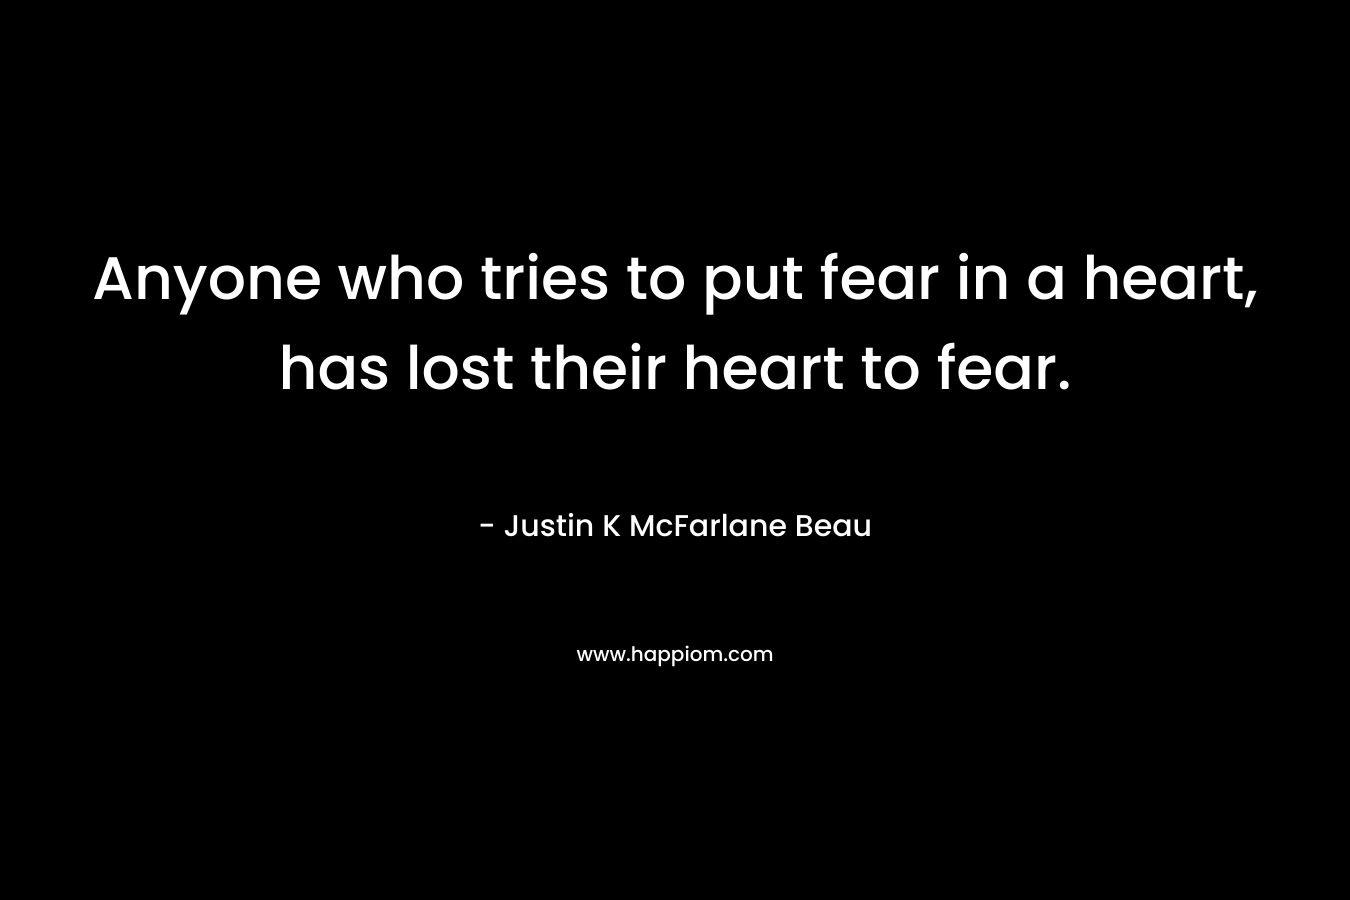 Anyone who tries to put fear in a heart, has lost their heart to fear.